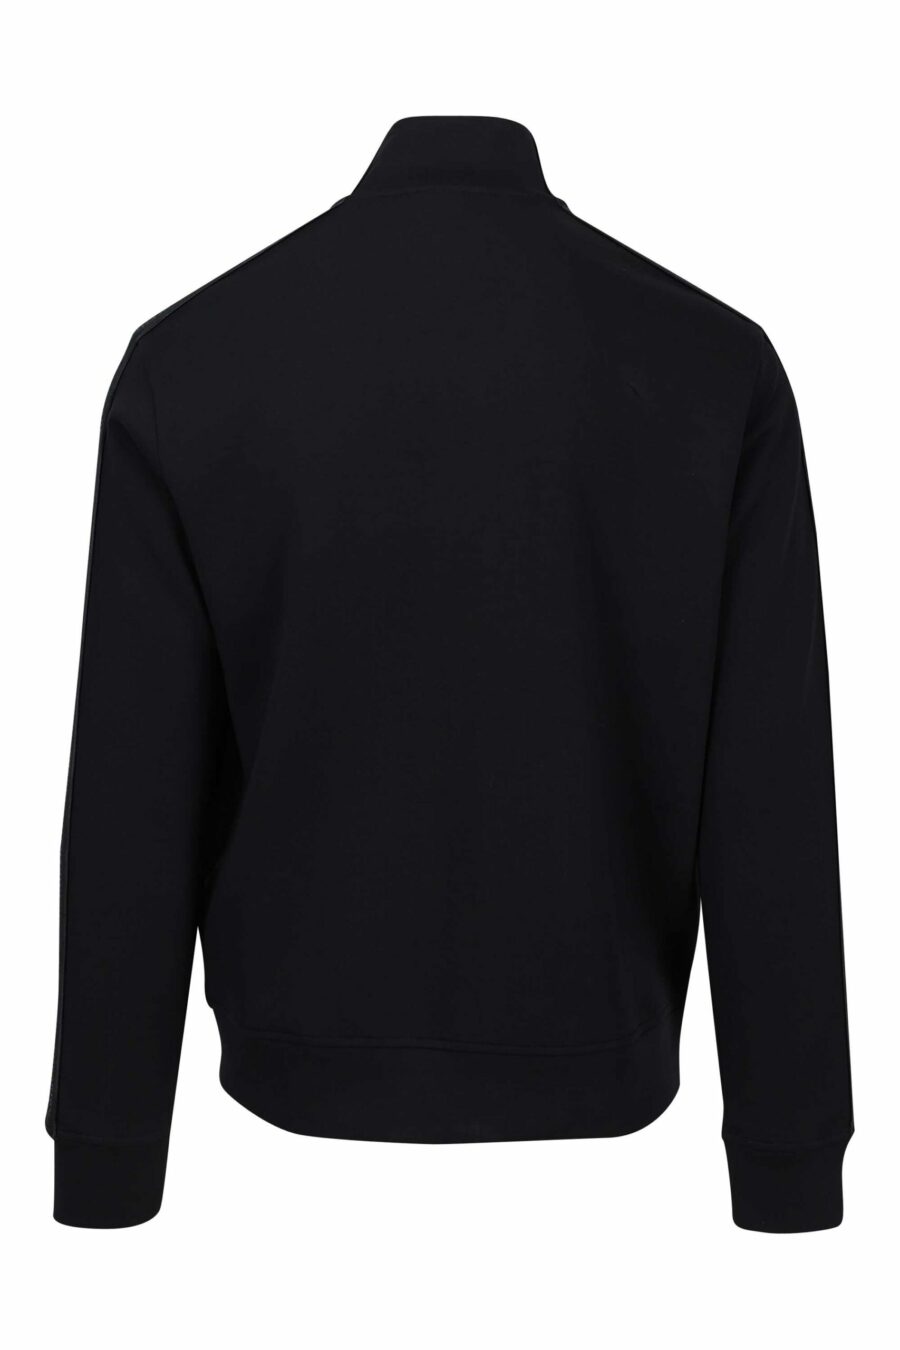 Black turtleneck sweatshirt with side stripes and minilogue - 8057767454784 2 scaled